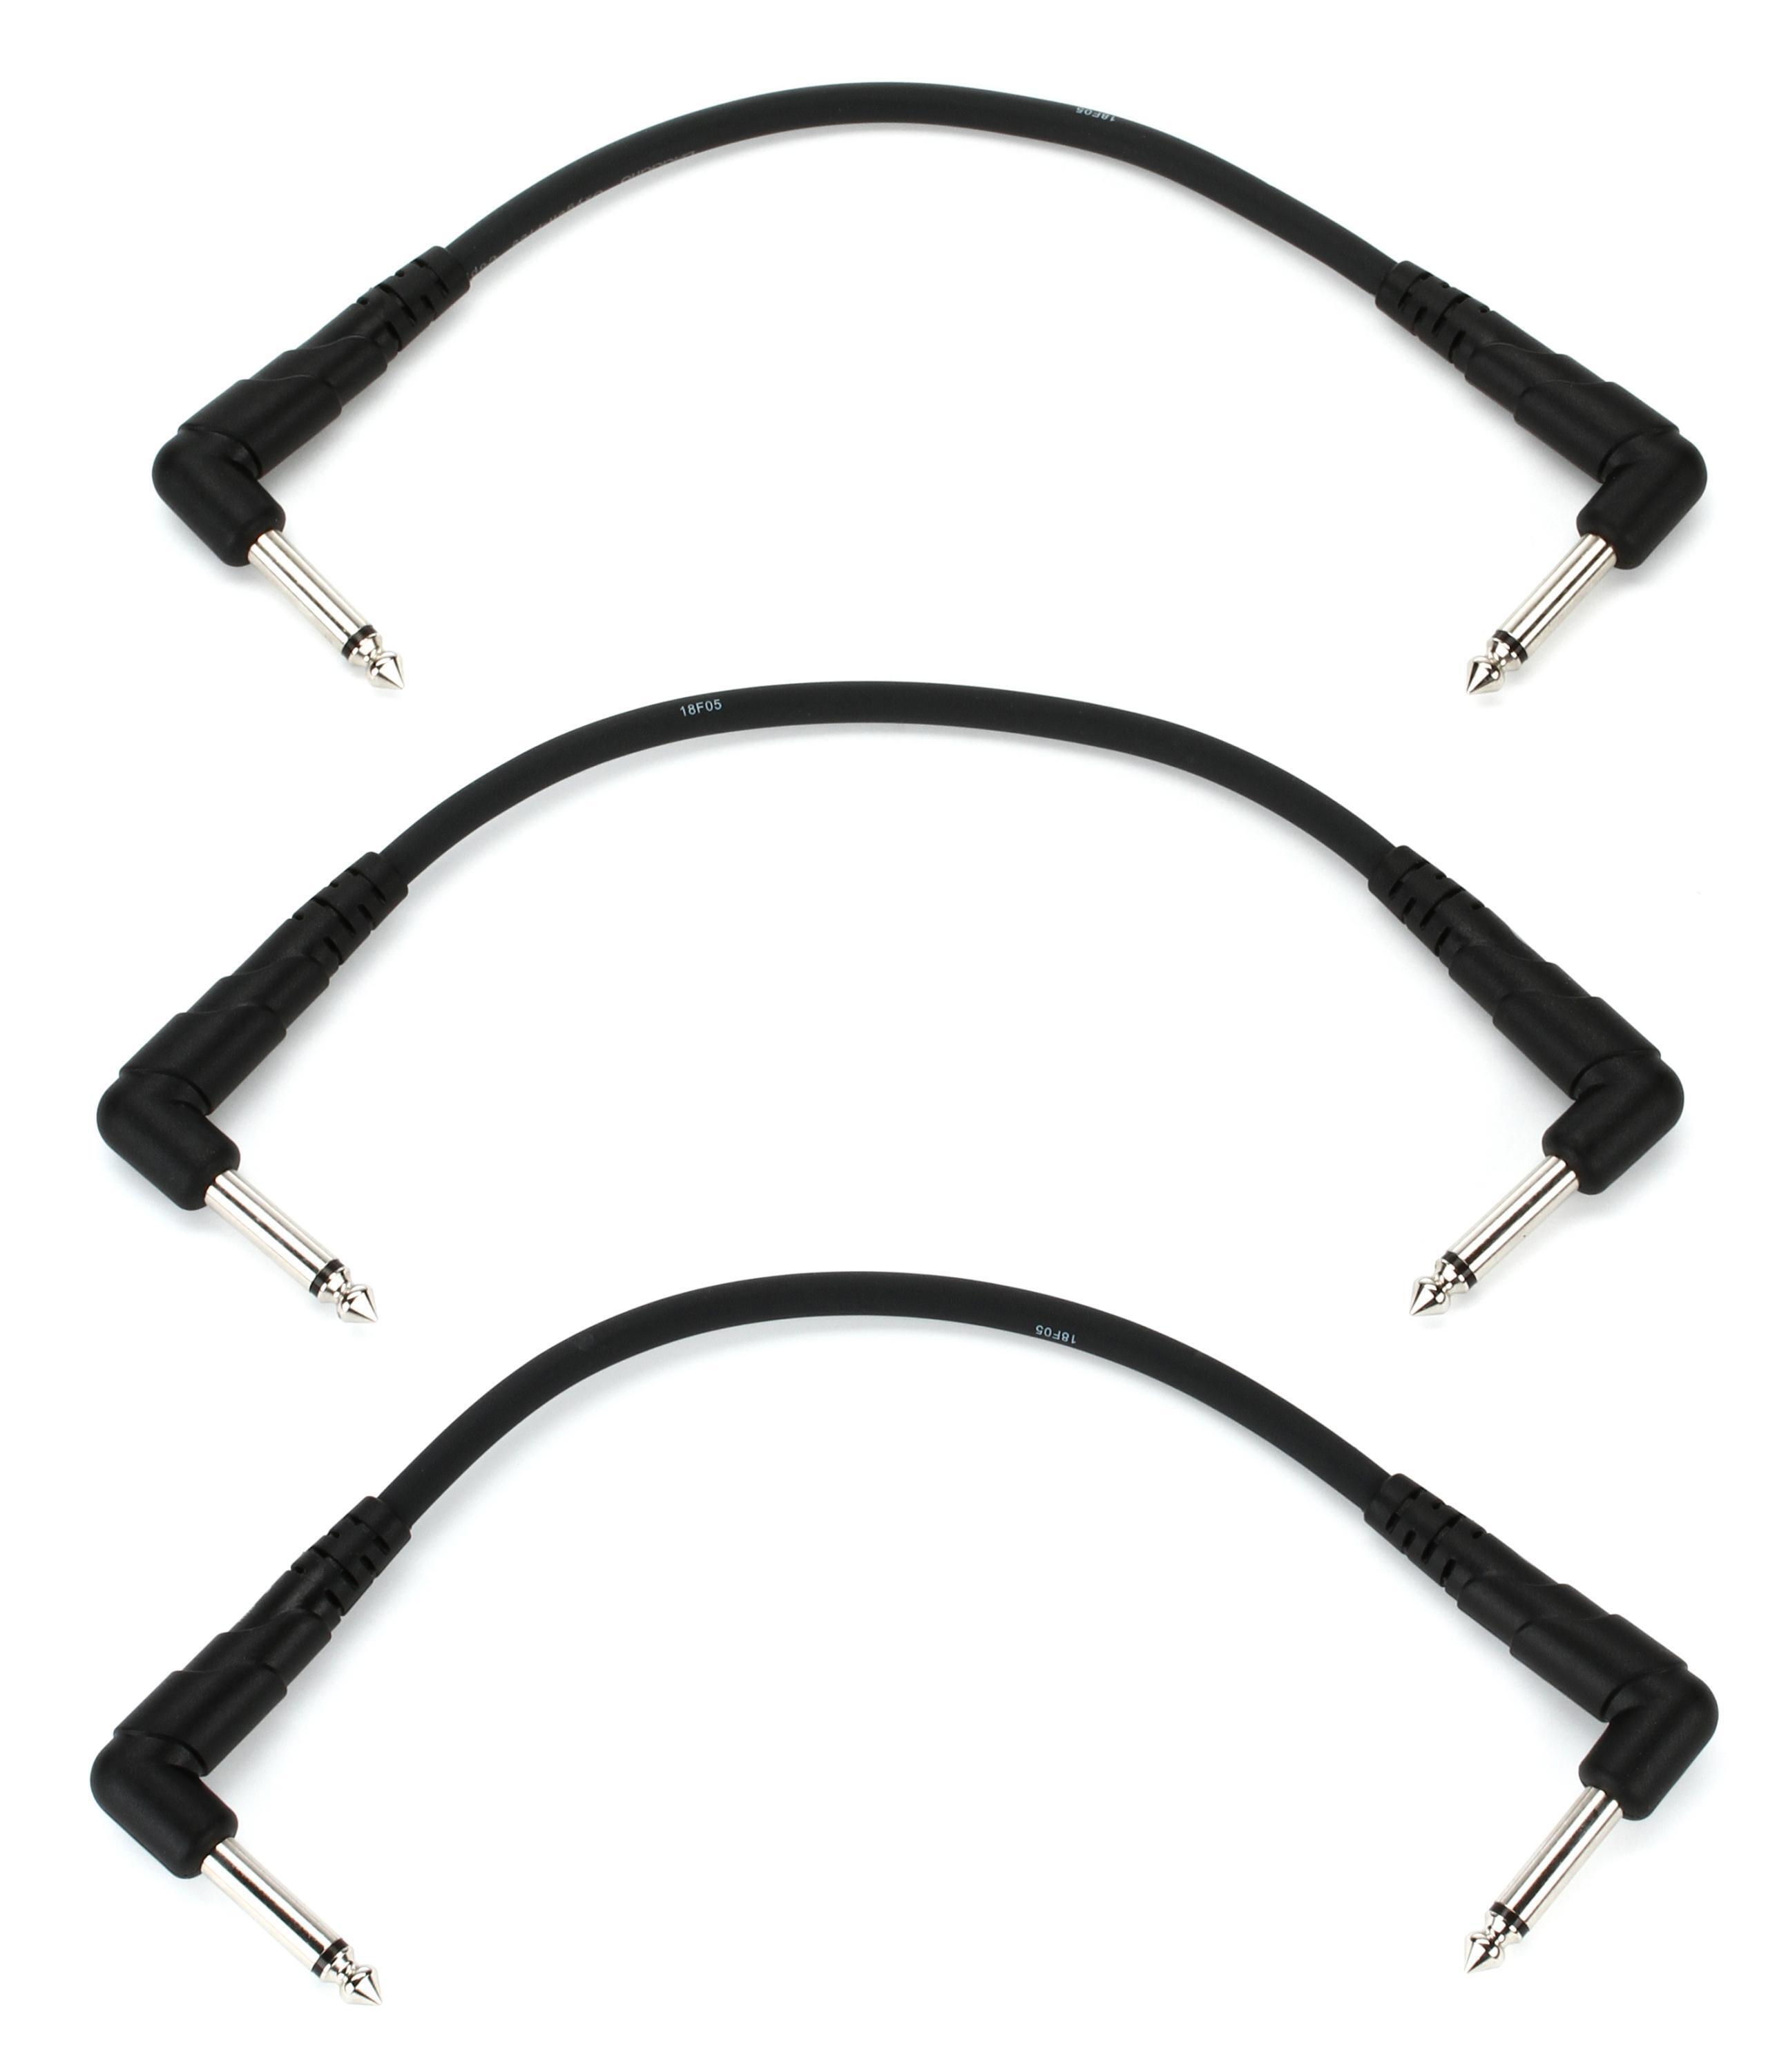 Bundled Item: D'Addario PW-CGTP-305 Classic Series Pedalboard Patch Cable - Right Angle to Right Angle - 6 inch (3-pack)